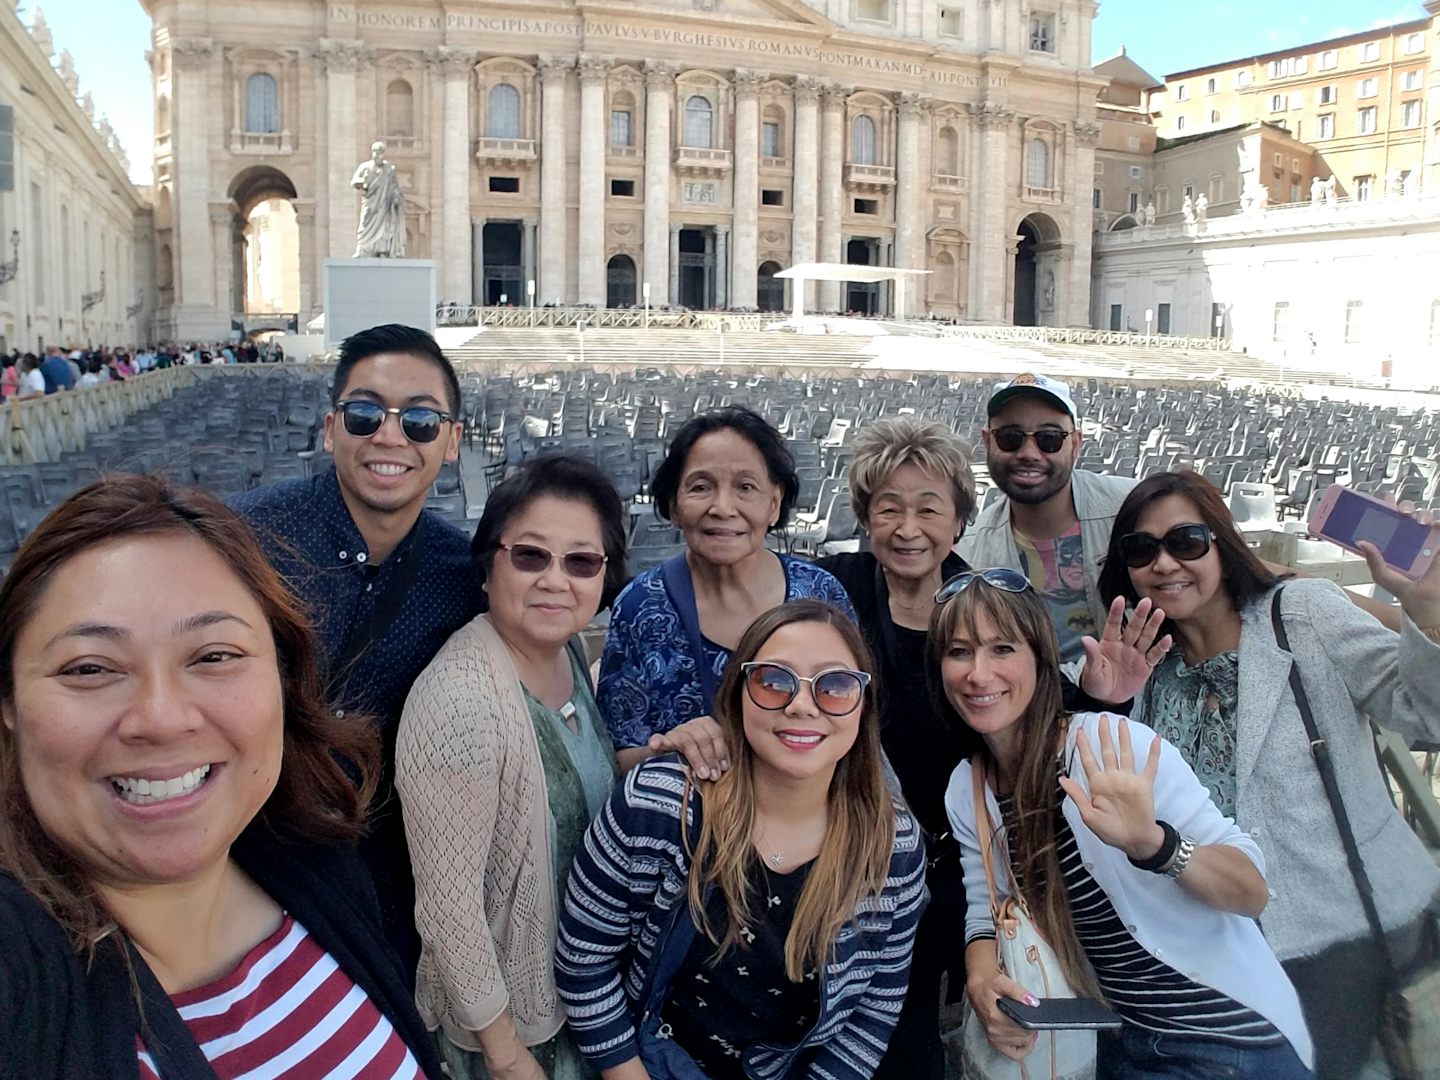 Manuella also from Joe Banana,  took us through the Vatican . Very knowledgeable and accommodating. She knows when and where to can avoid the long lines. She was patient with our group.